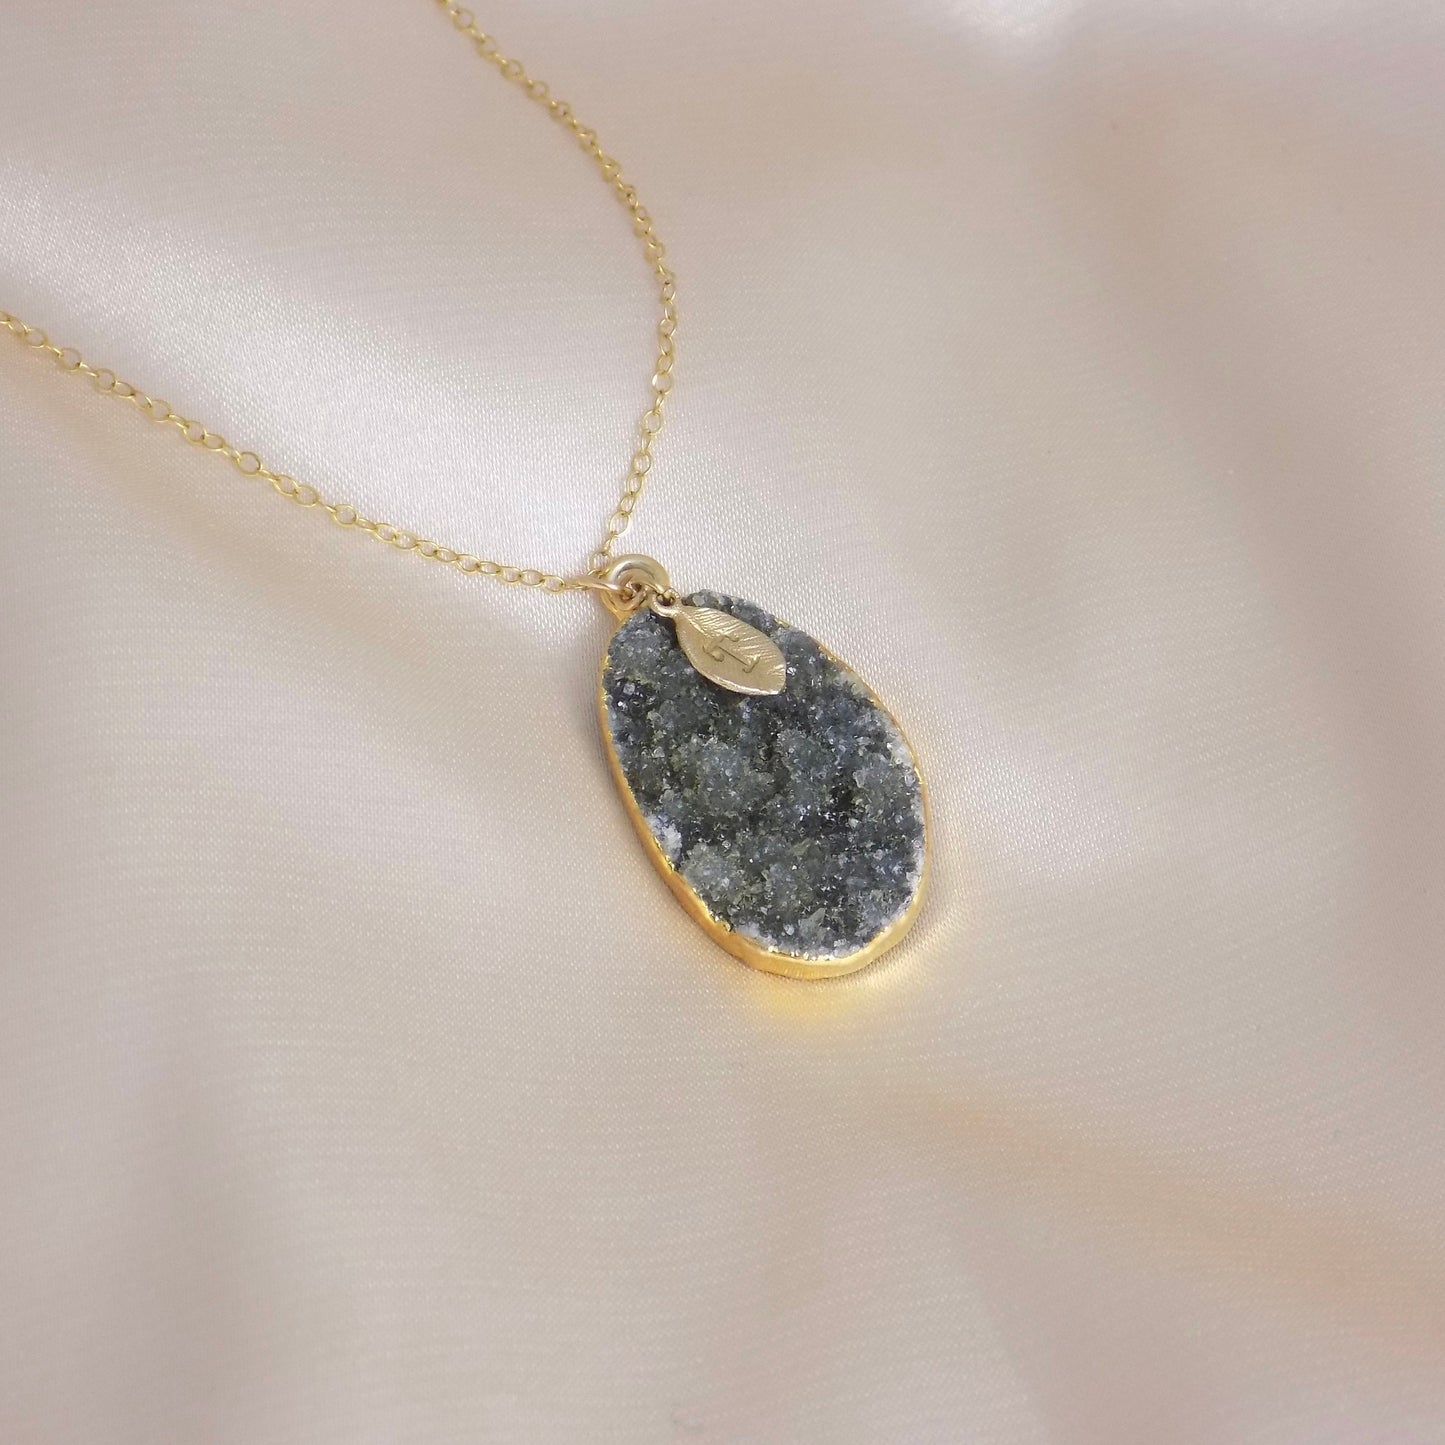 Personalized Natural Druzy Necklace Gold, Dark Gray Crystal Pendant, Christmas Gift For Her, G13-503